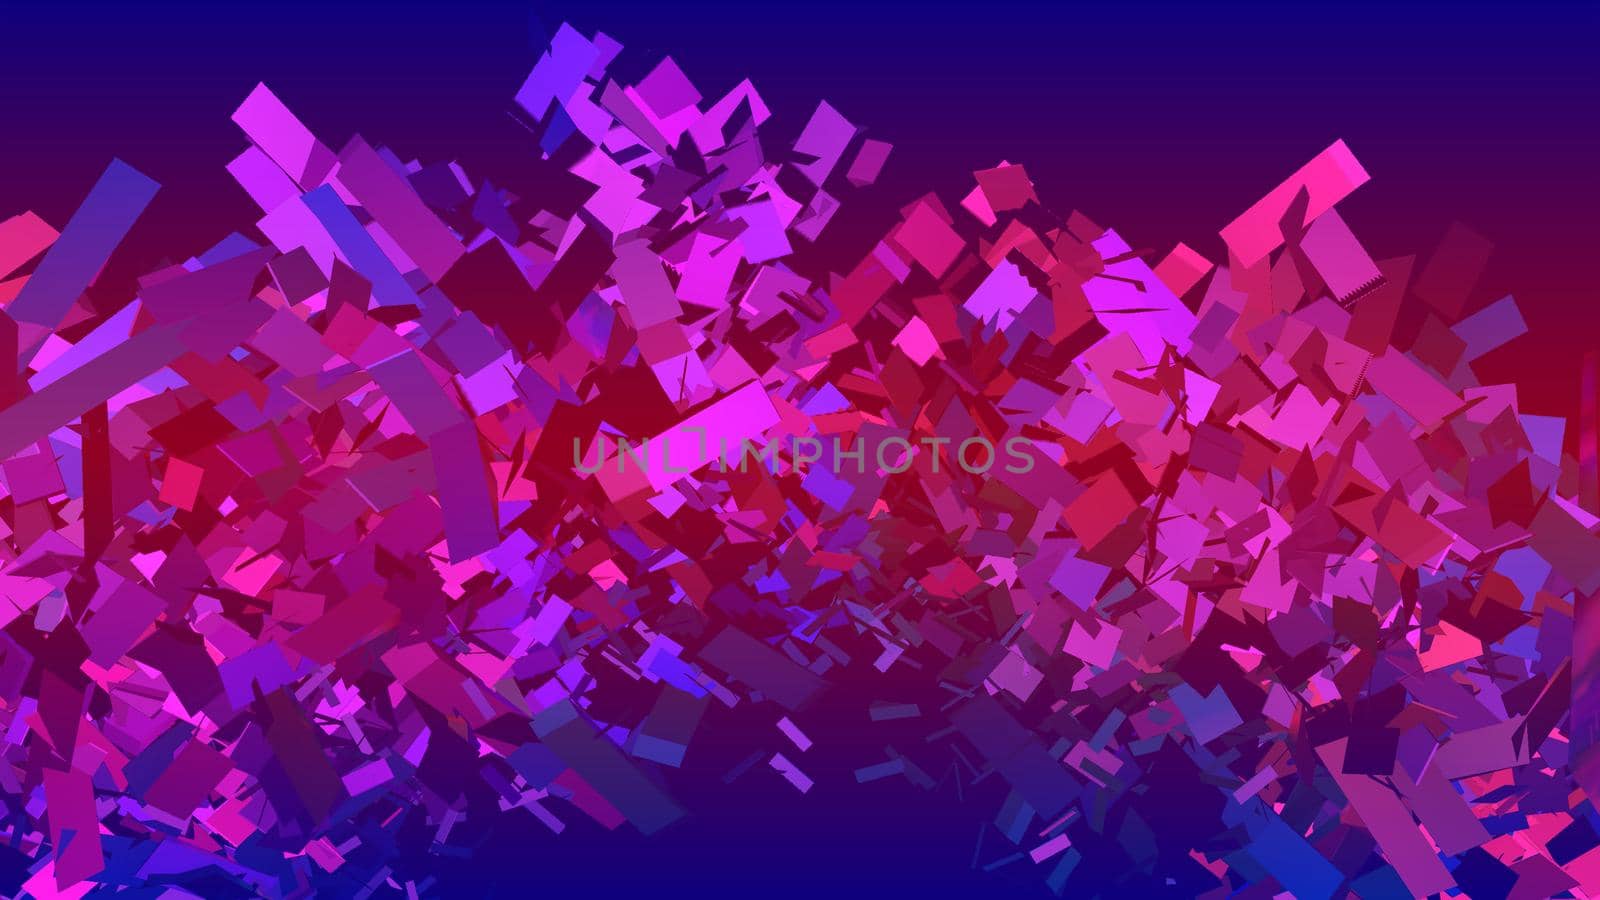 Abstract dark blue background with glowing shapes by Vvicca